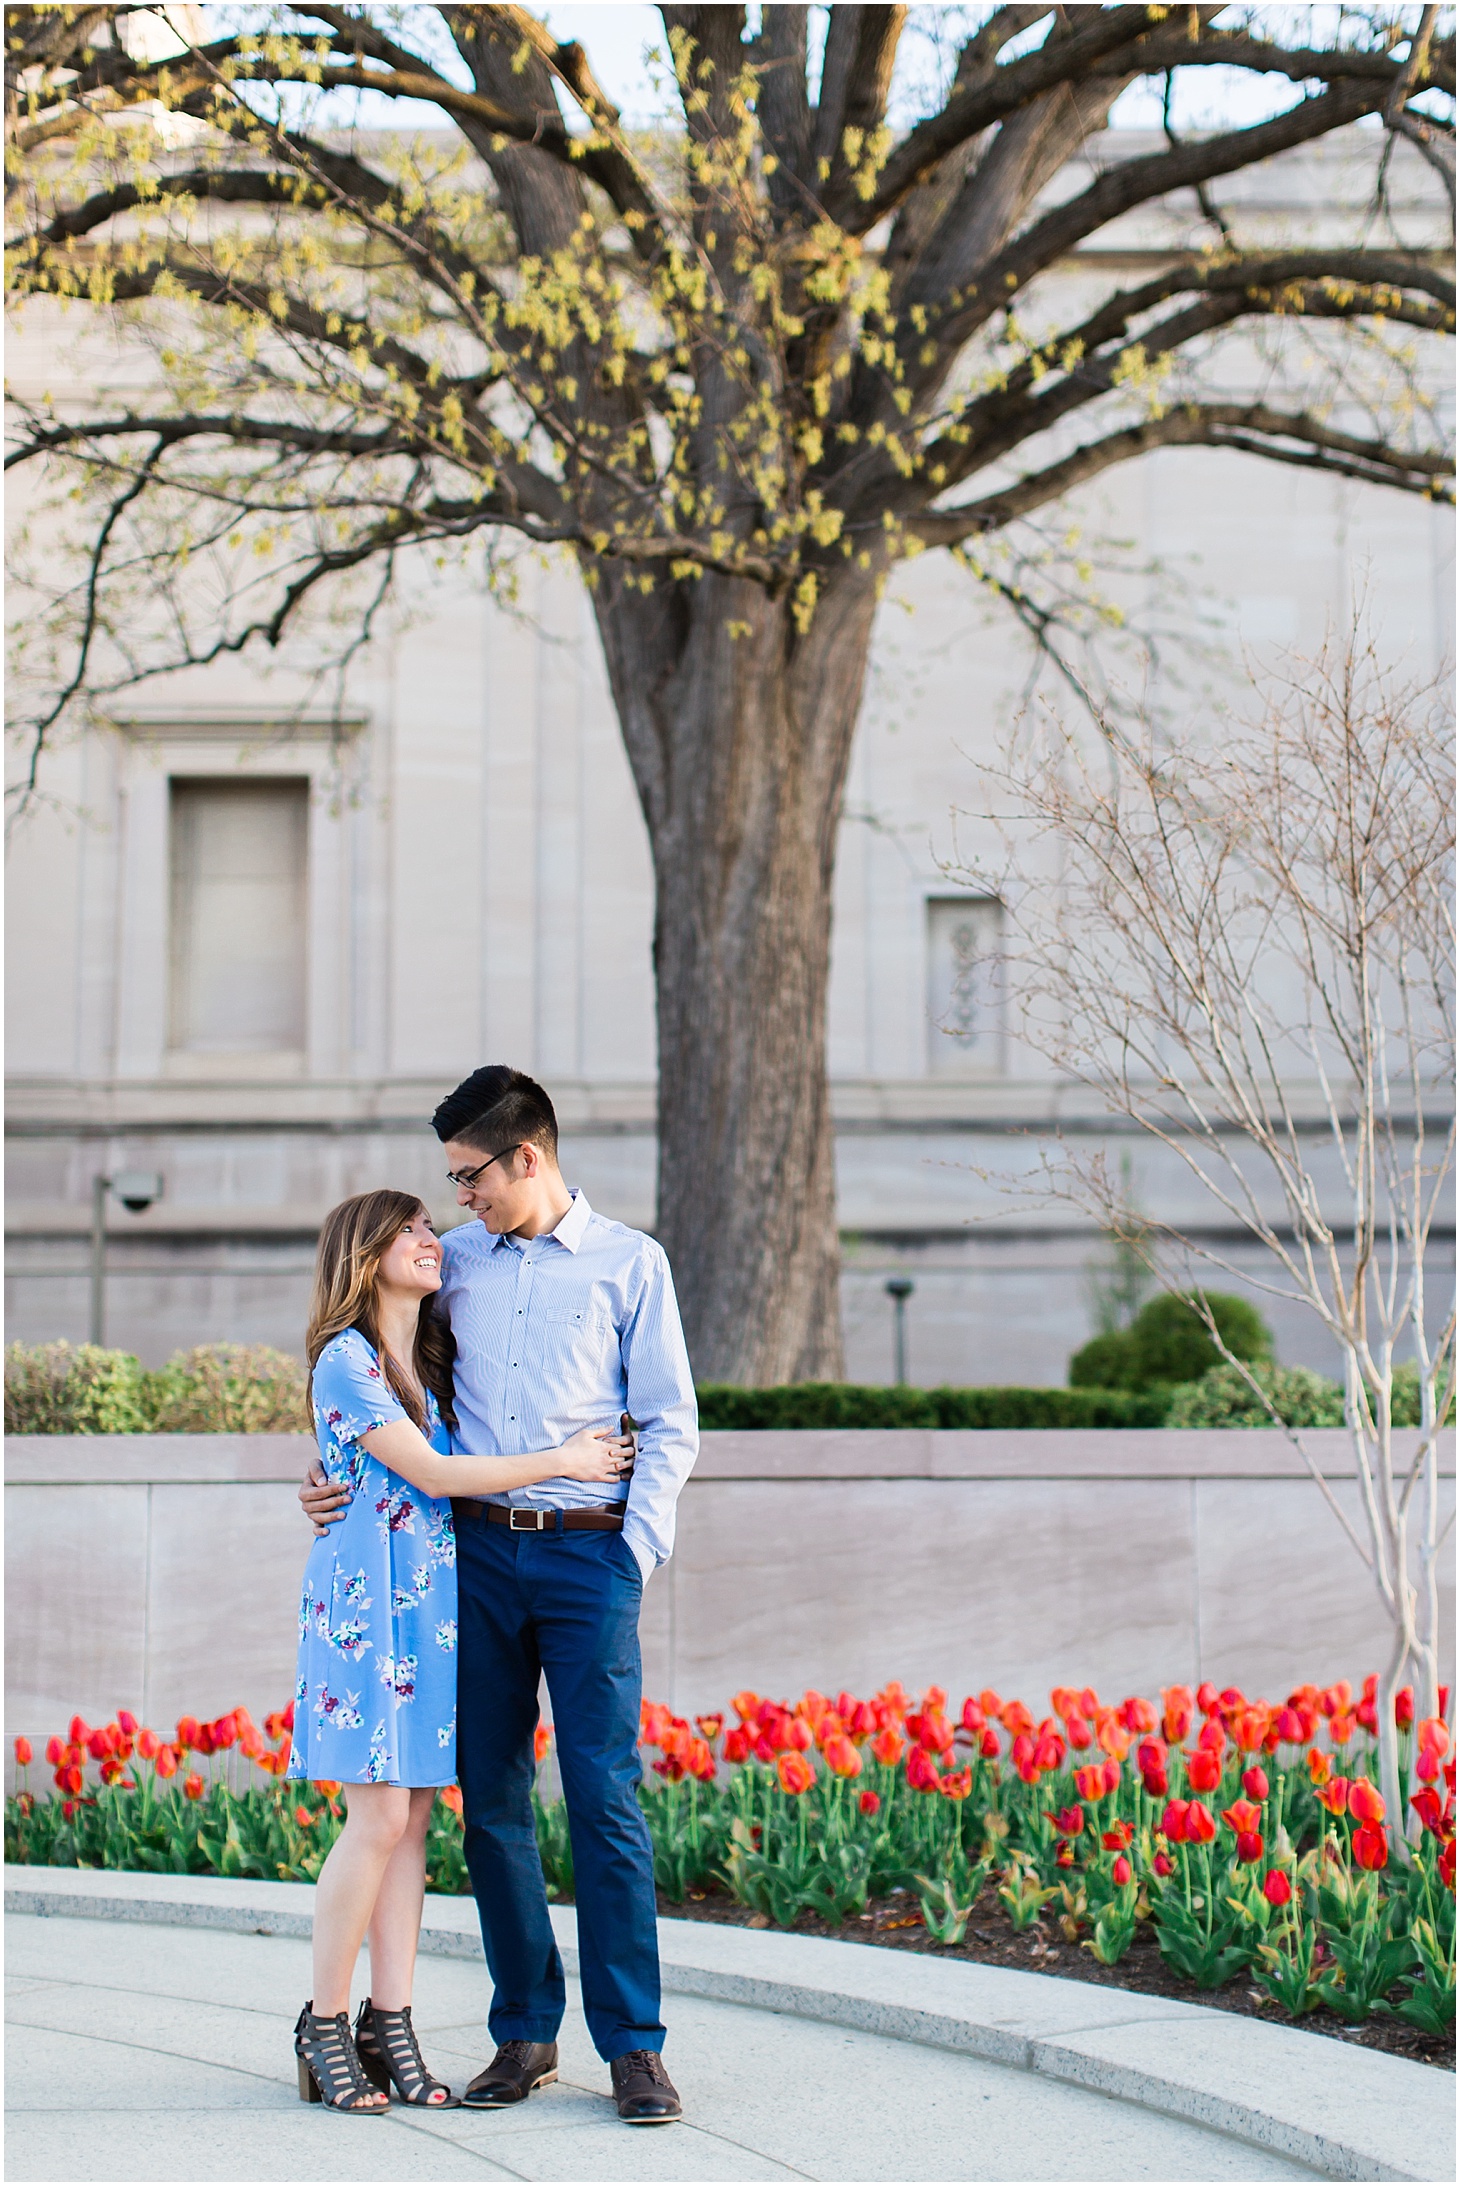 Spring Sunrise Engagement Session at the National Gallery of Art in Washington DC | Sarah Bradshaw Photography